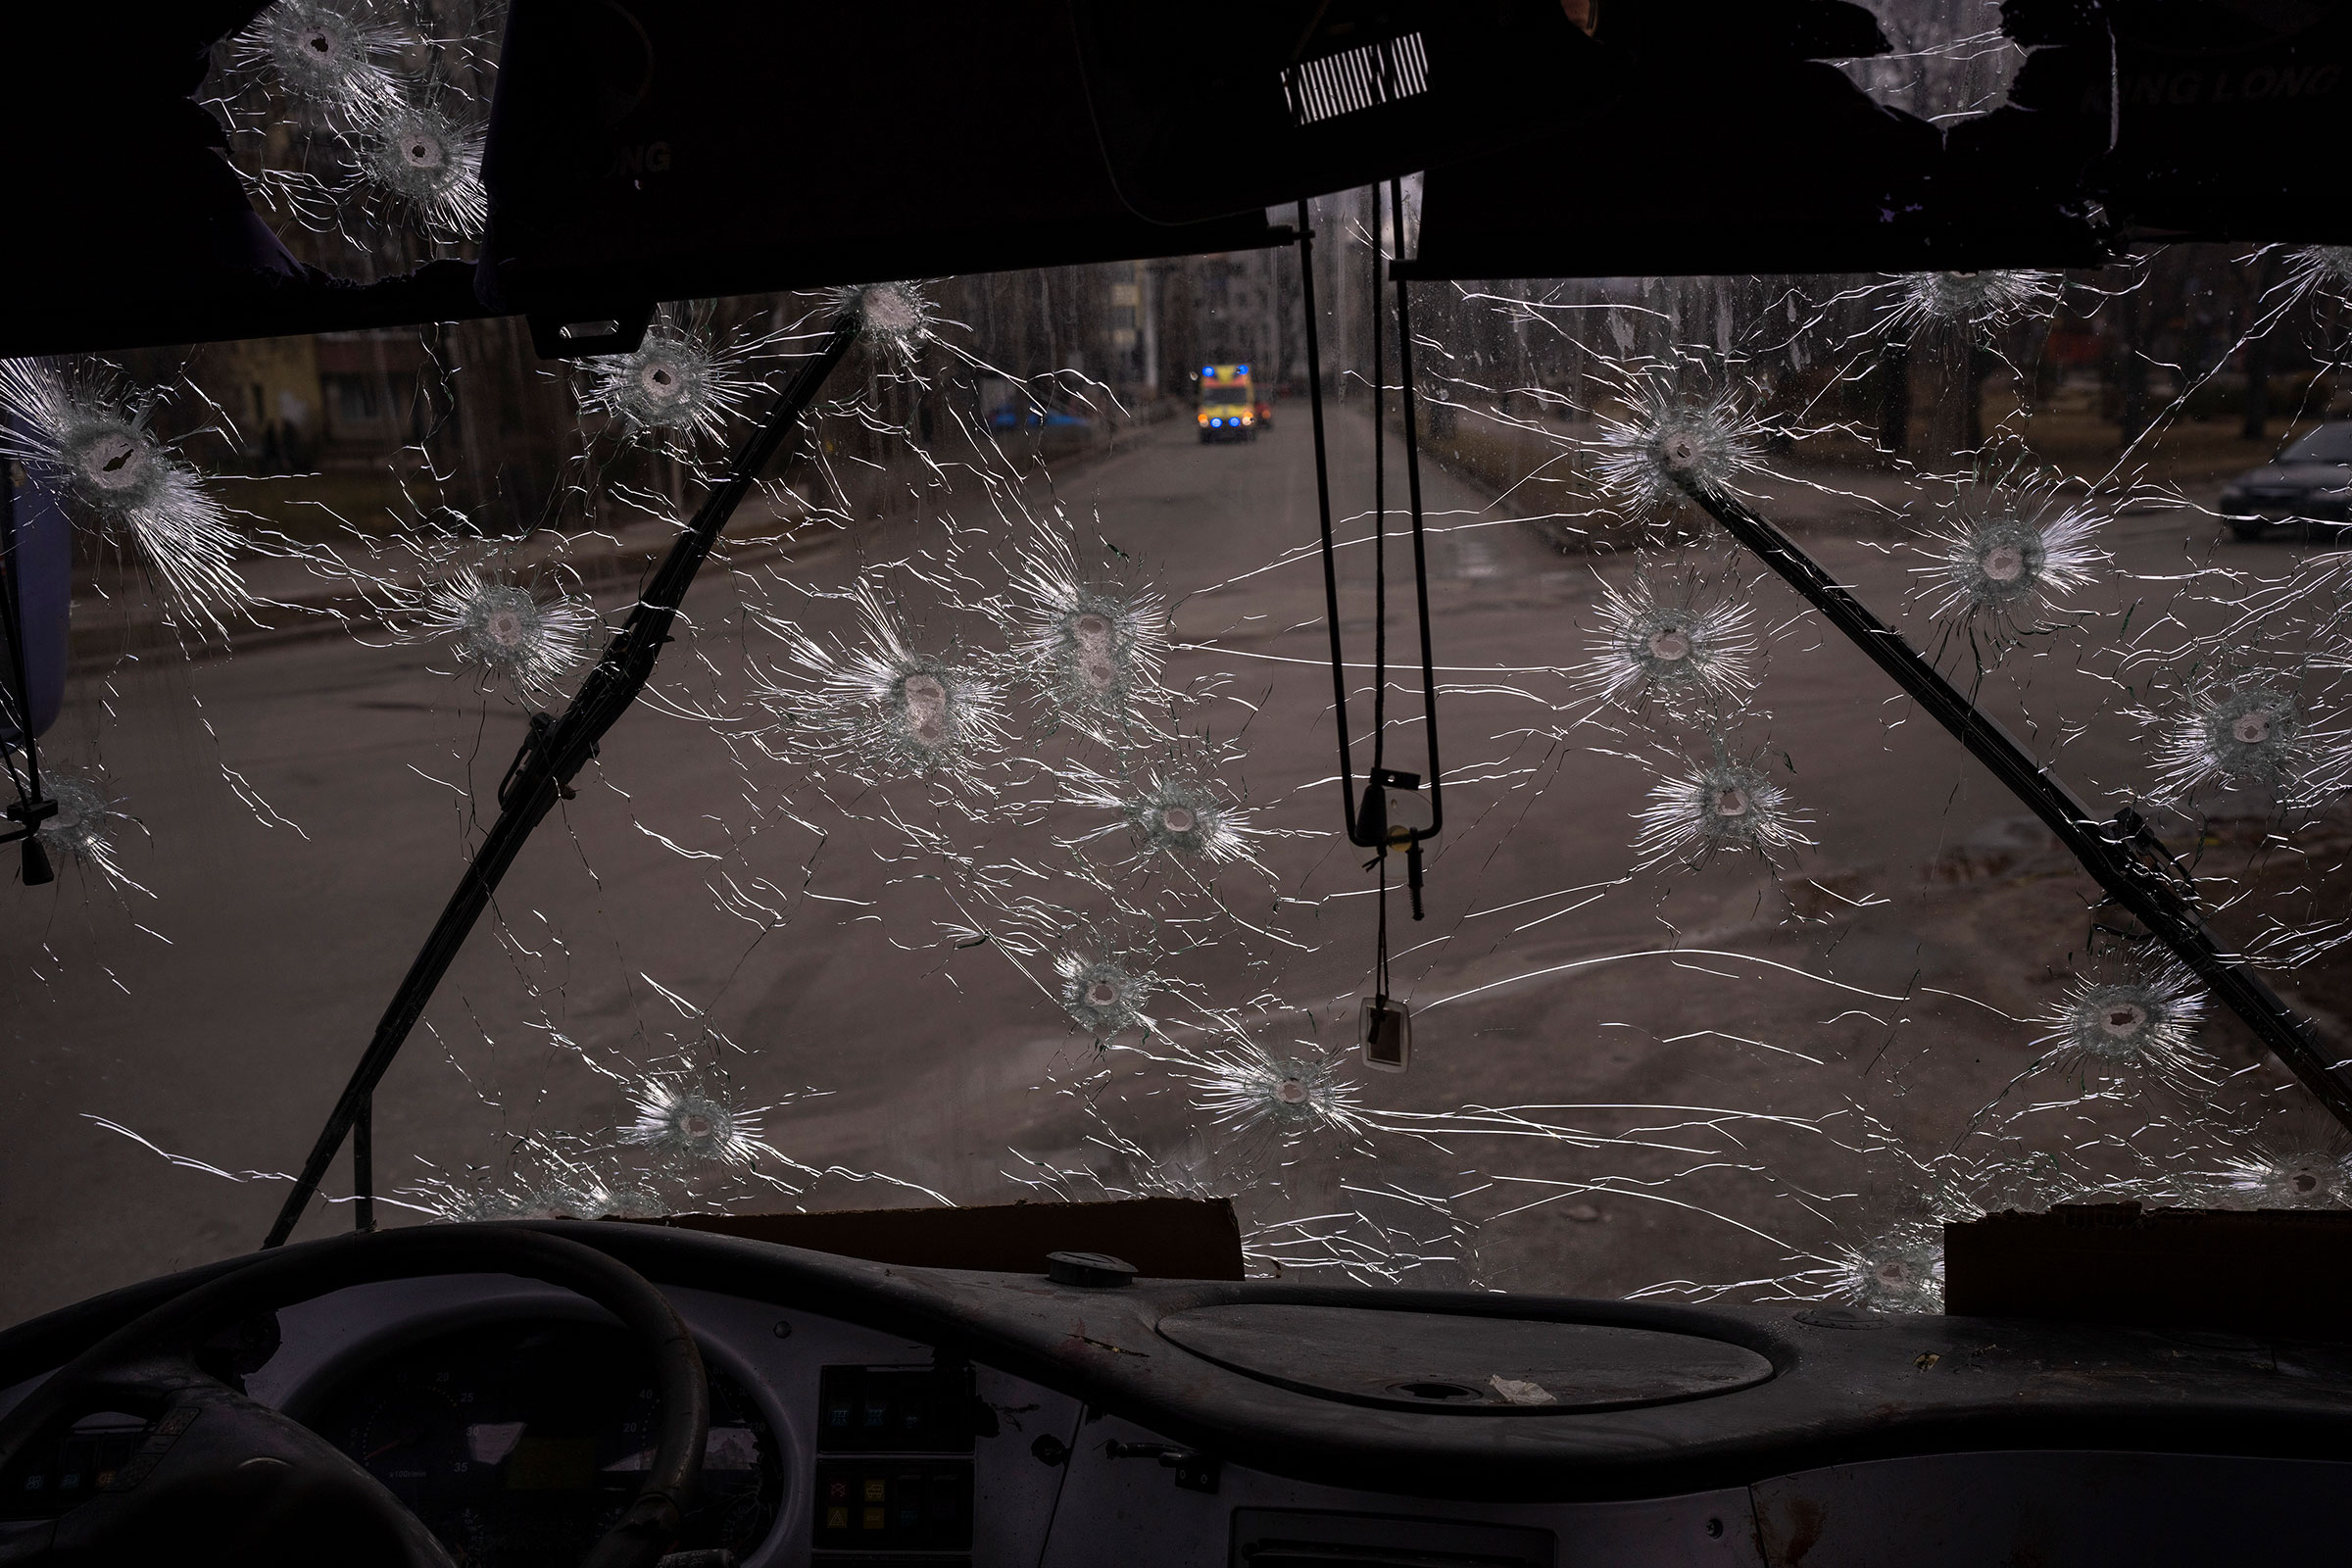 A machine-gunned bus is photographed after an ambush in the city of Kyiv on March 4. (Emilio Morenatti—AP)